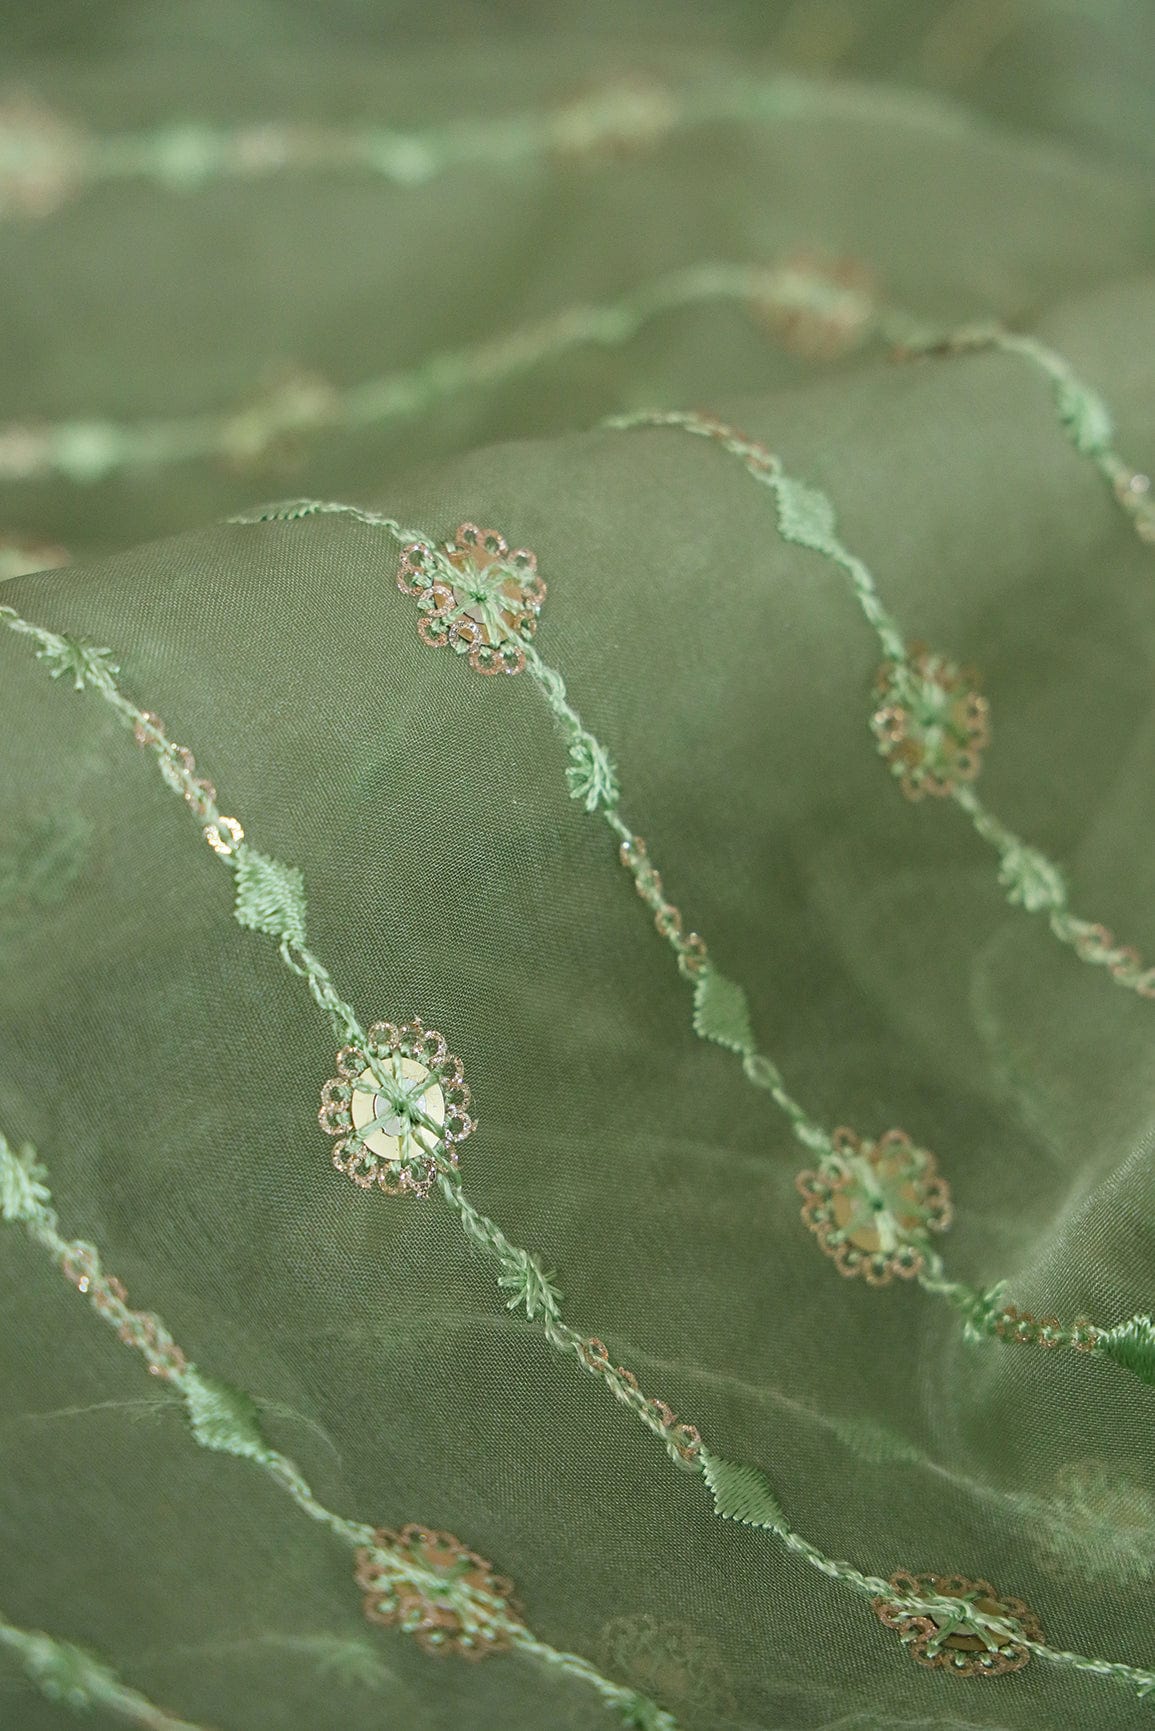 doeraa Embroidery Fabrics 3 Meter Cut Piece Of Gold Sequins With Thread Embroidery On Olive Green Organza Fabric